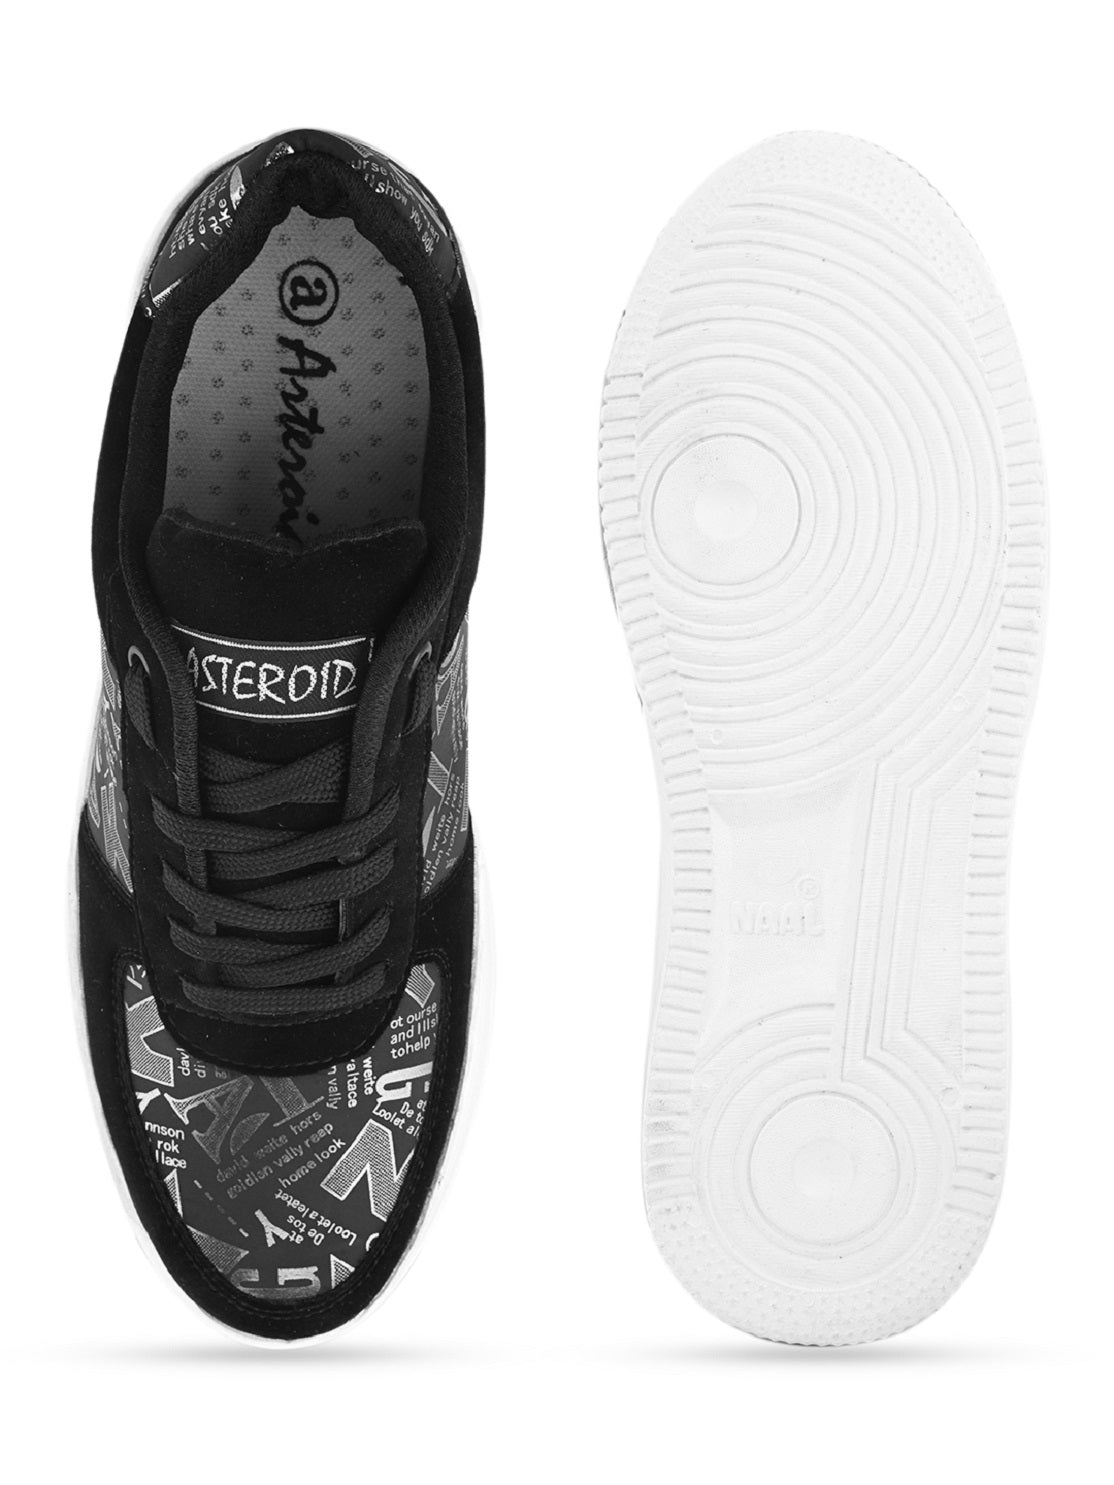 ASTEROID Luxurious Casual Sneakers.